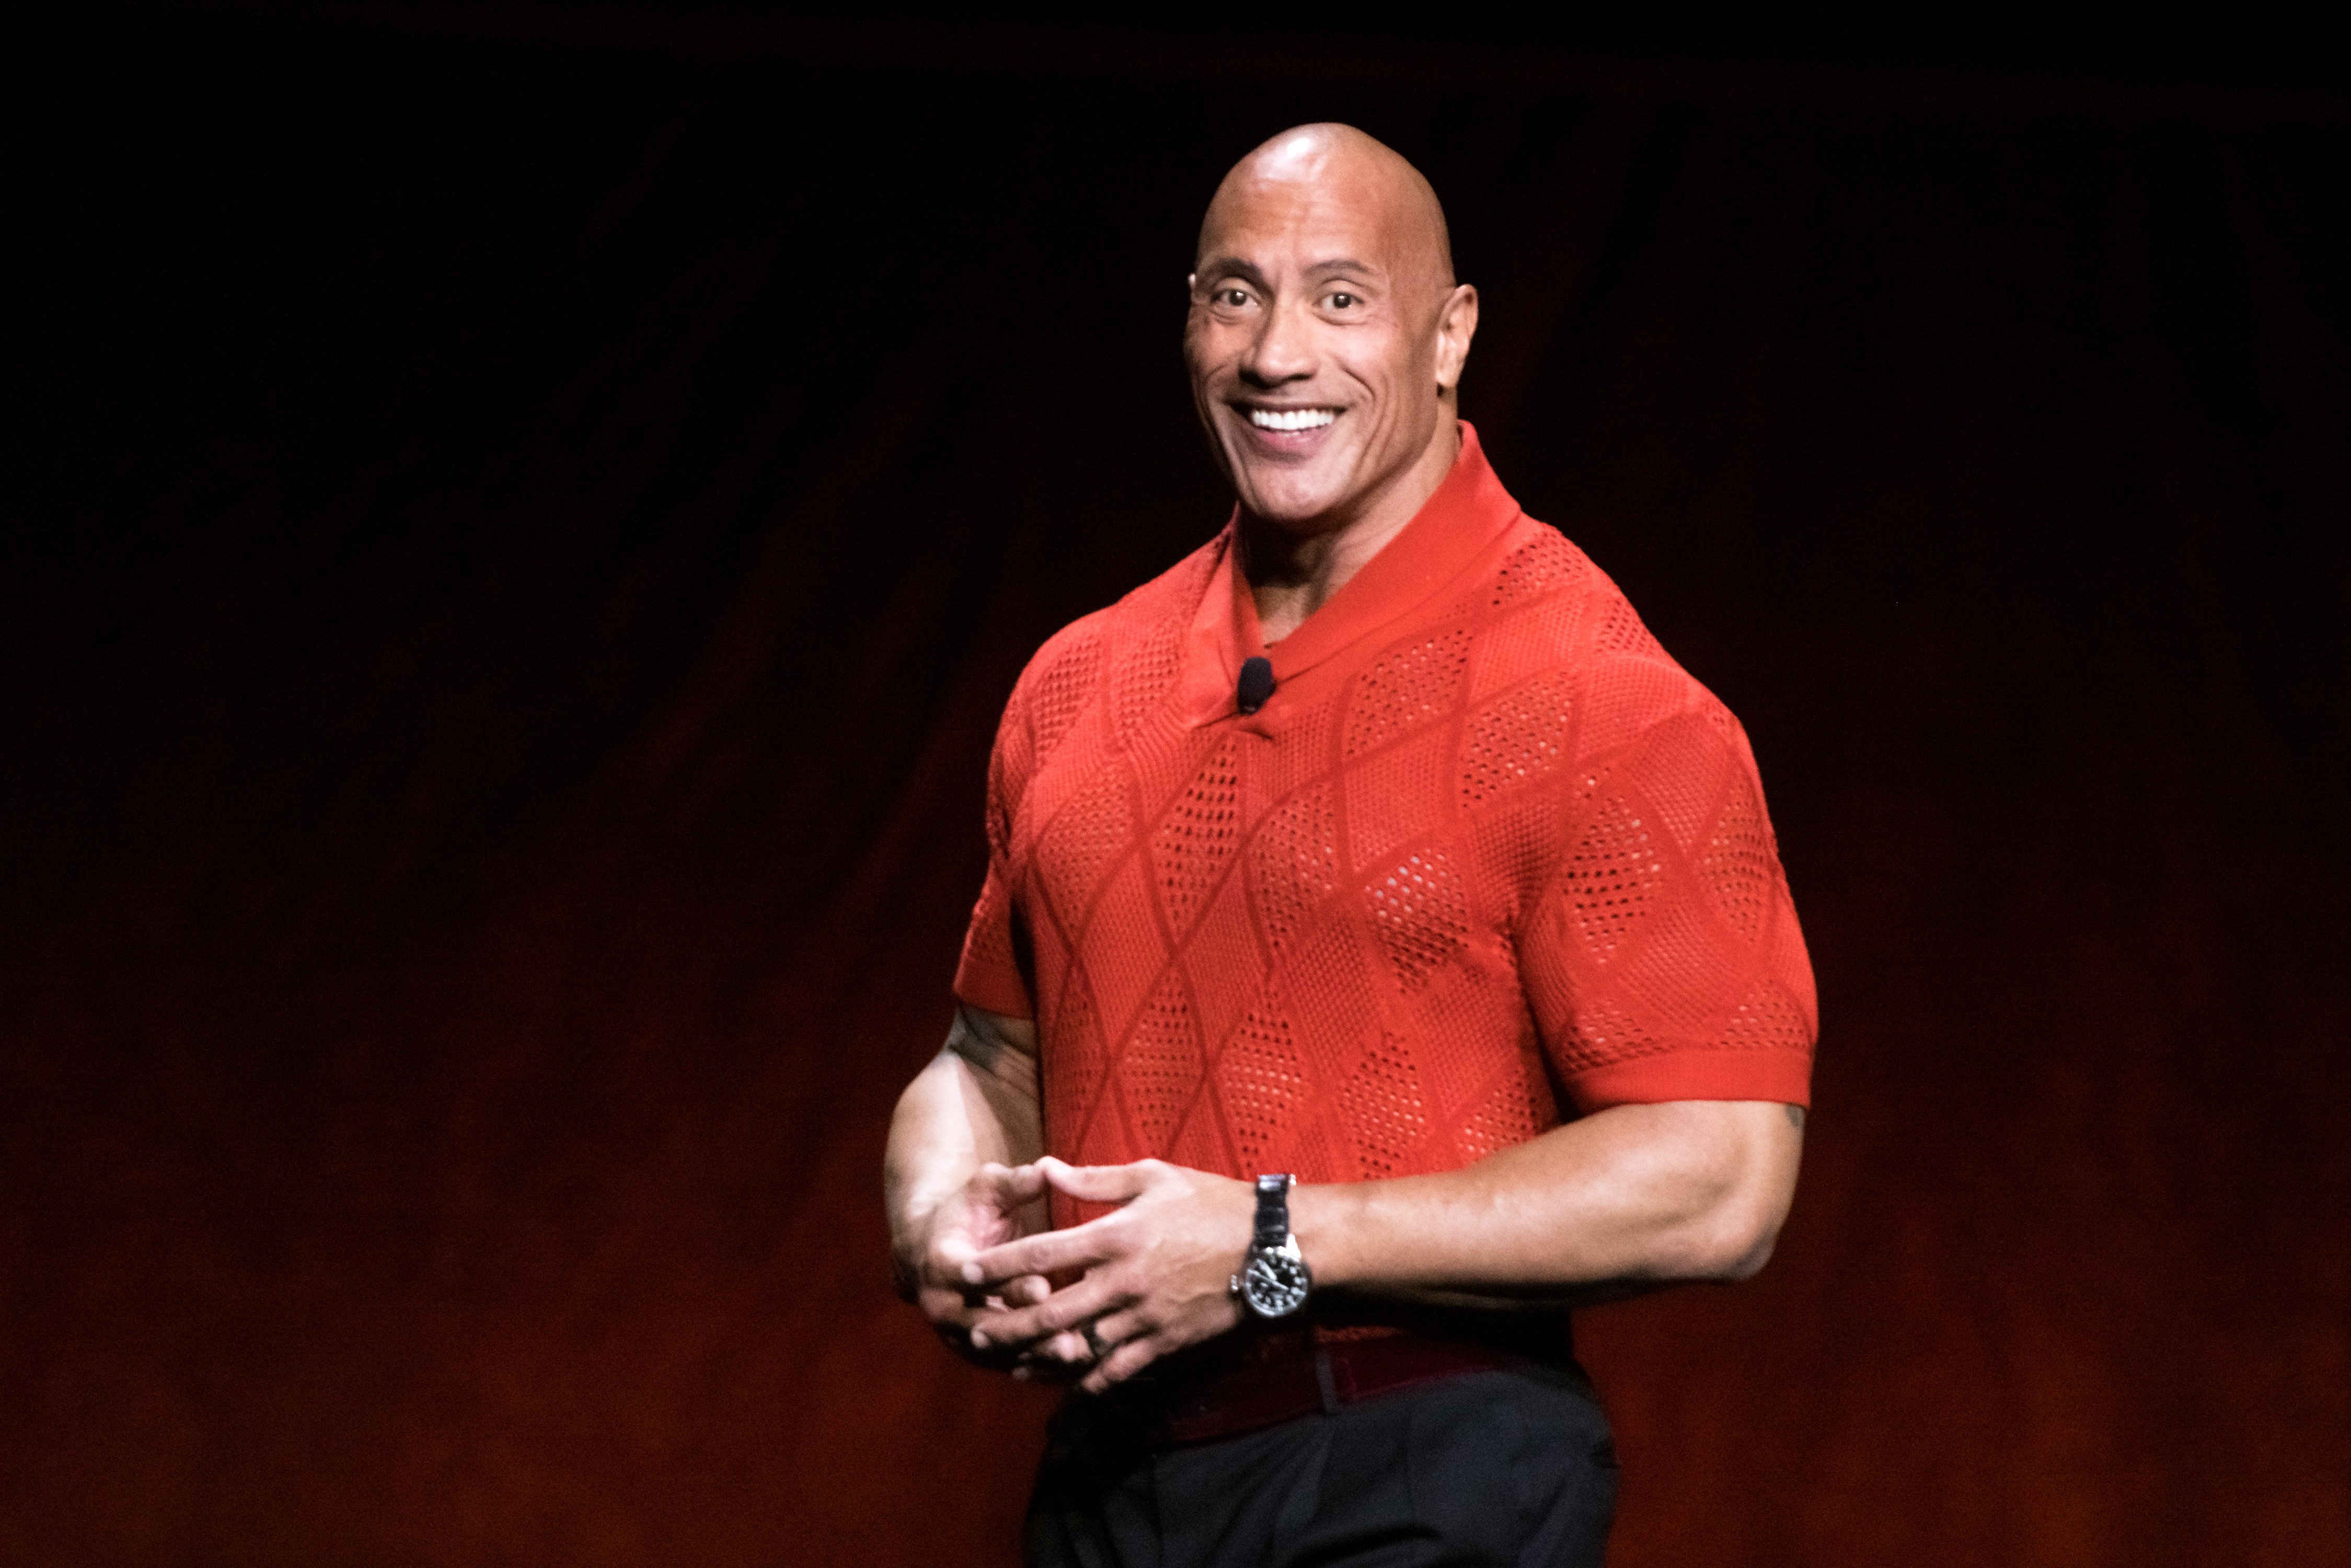 Actor Dwayne "The Rock" Johnson speaks onstage during CinemaCon 2022 - Warner Bros. Pictures “The Big Picture” Presentation during CinemaCon 2022 at Caesars Palace on April 26, 2022 in Las Vegas, Nevada. | Source: Getty Images